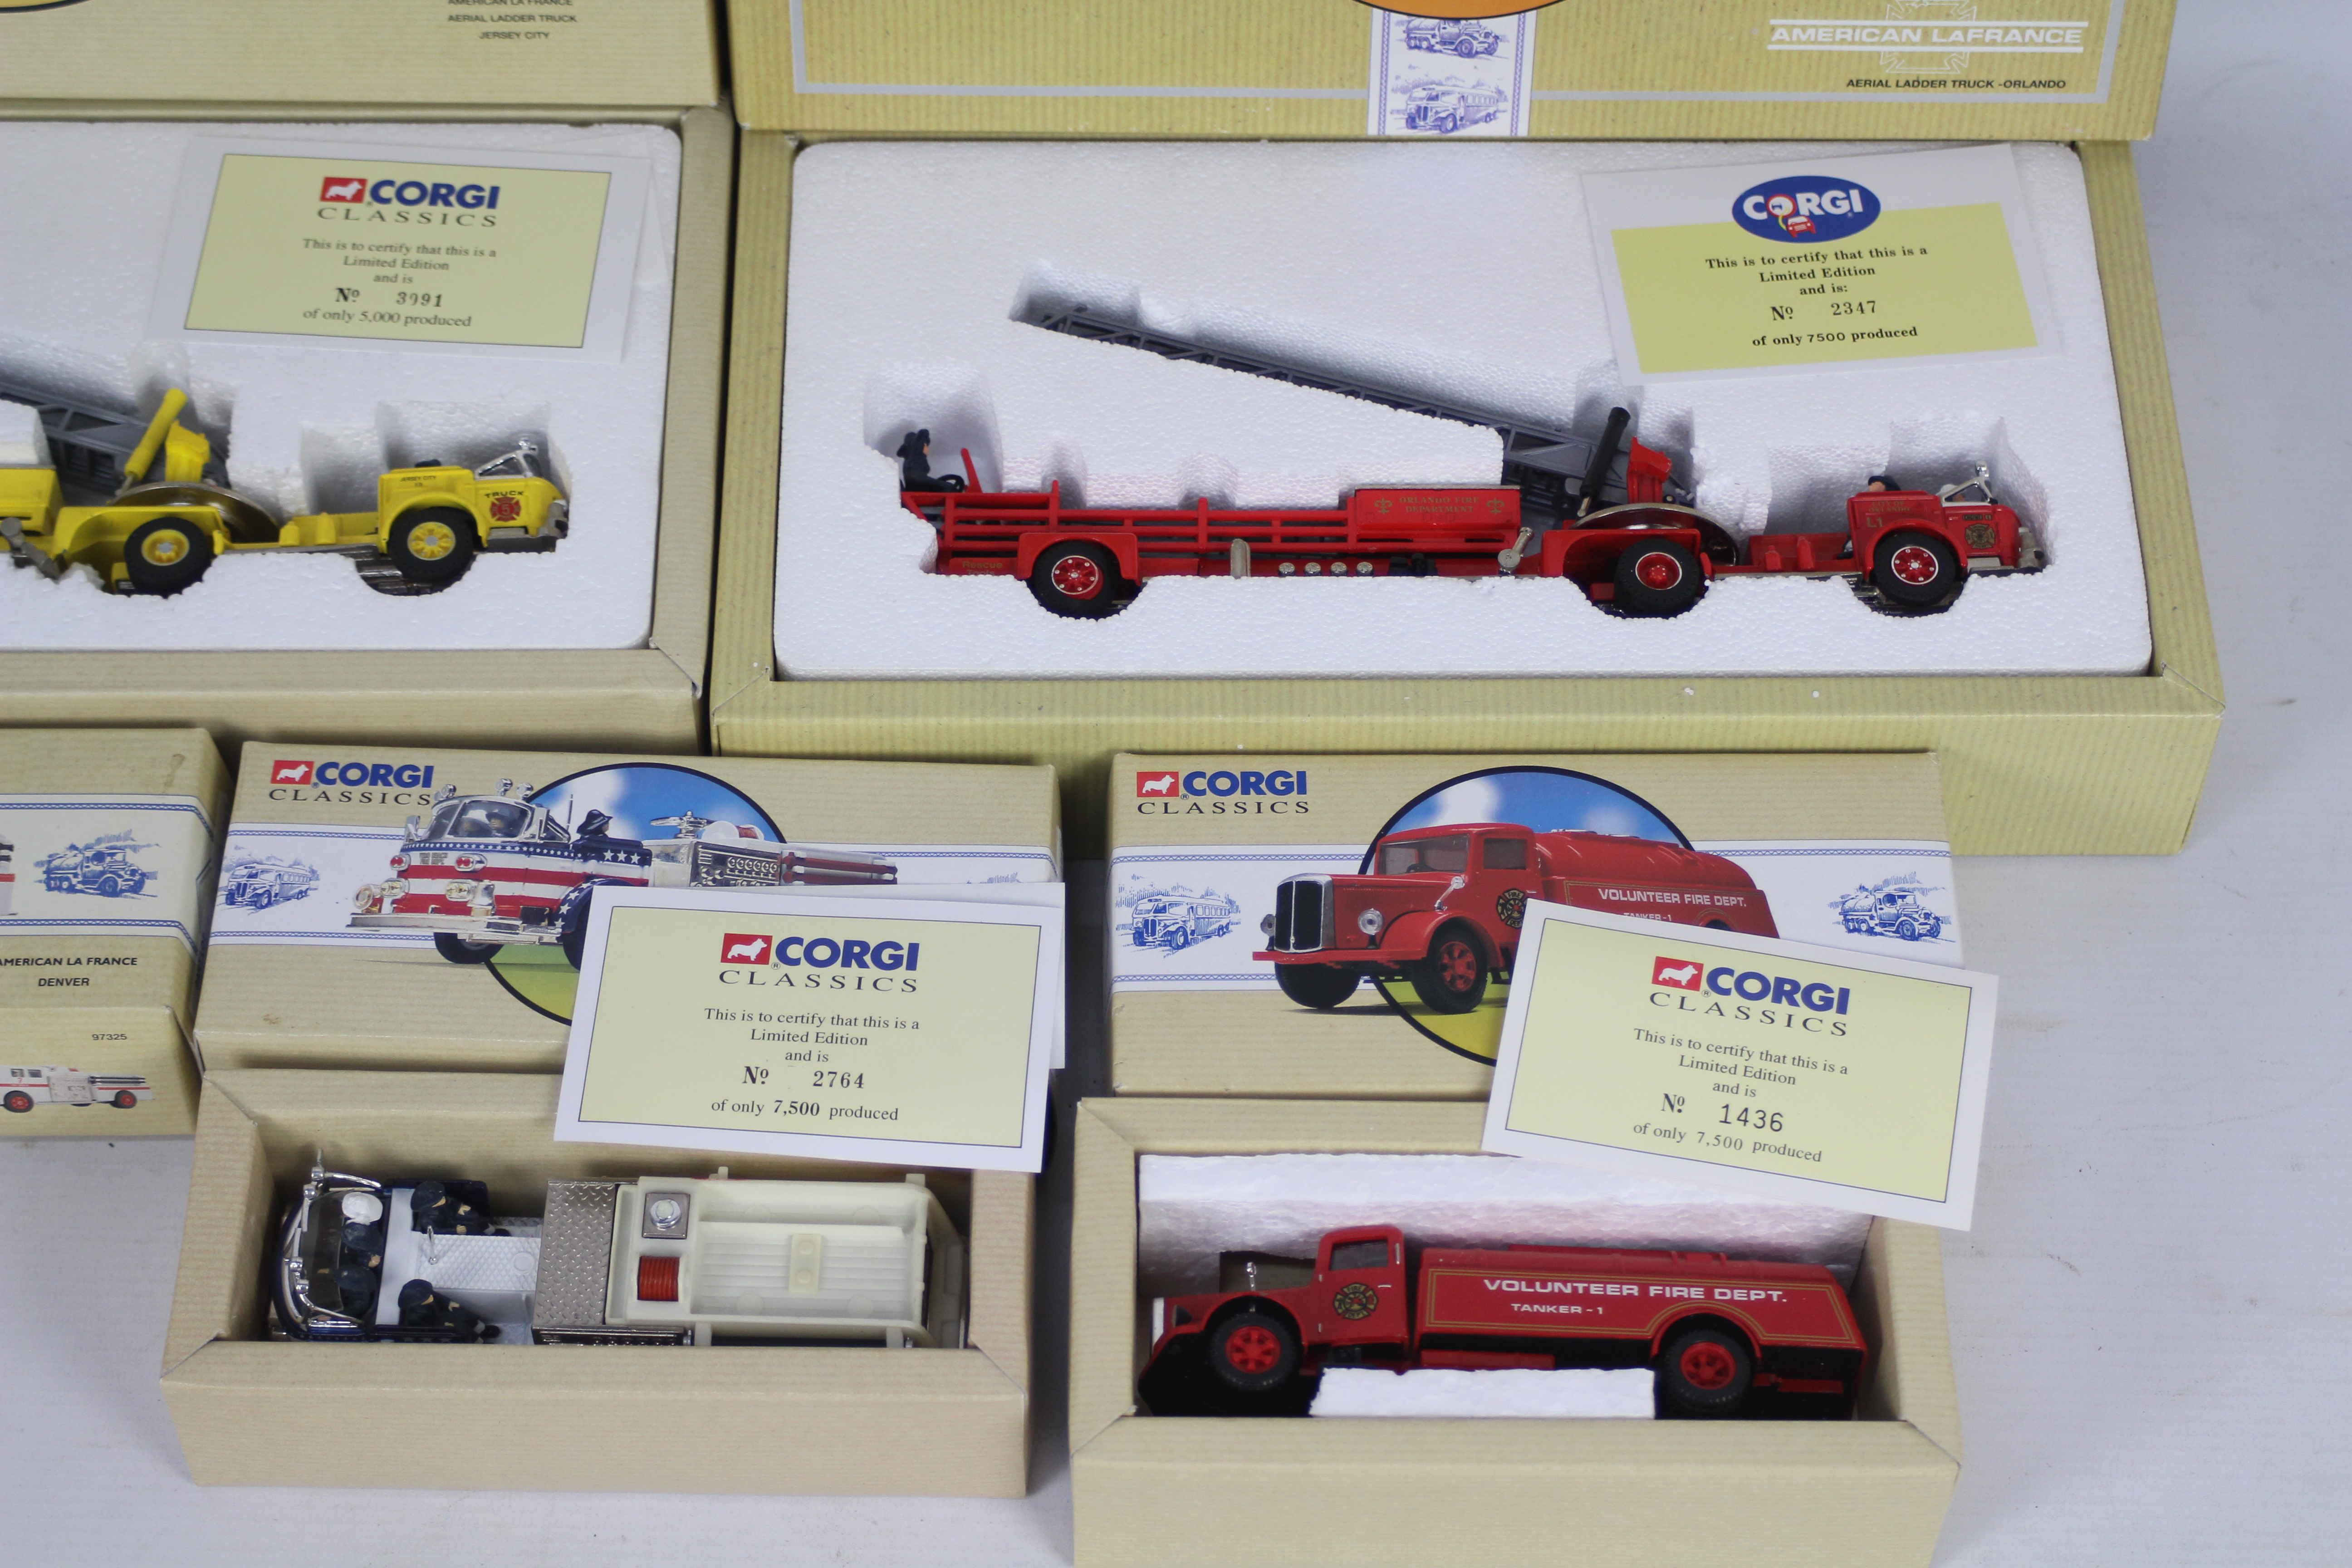 Corgi - 5 x boxed limited edition American LaFrance Fire Trucks in 1:50 scale including # 97398 - Image 2 of 3